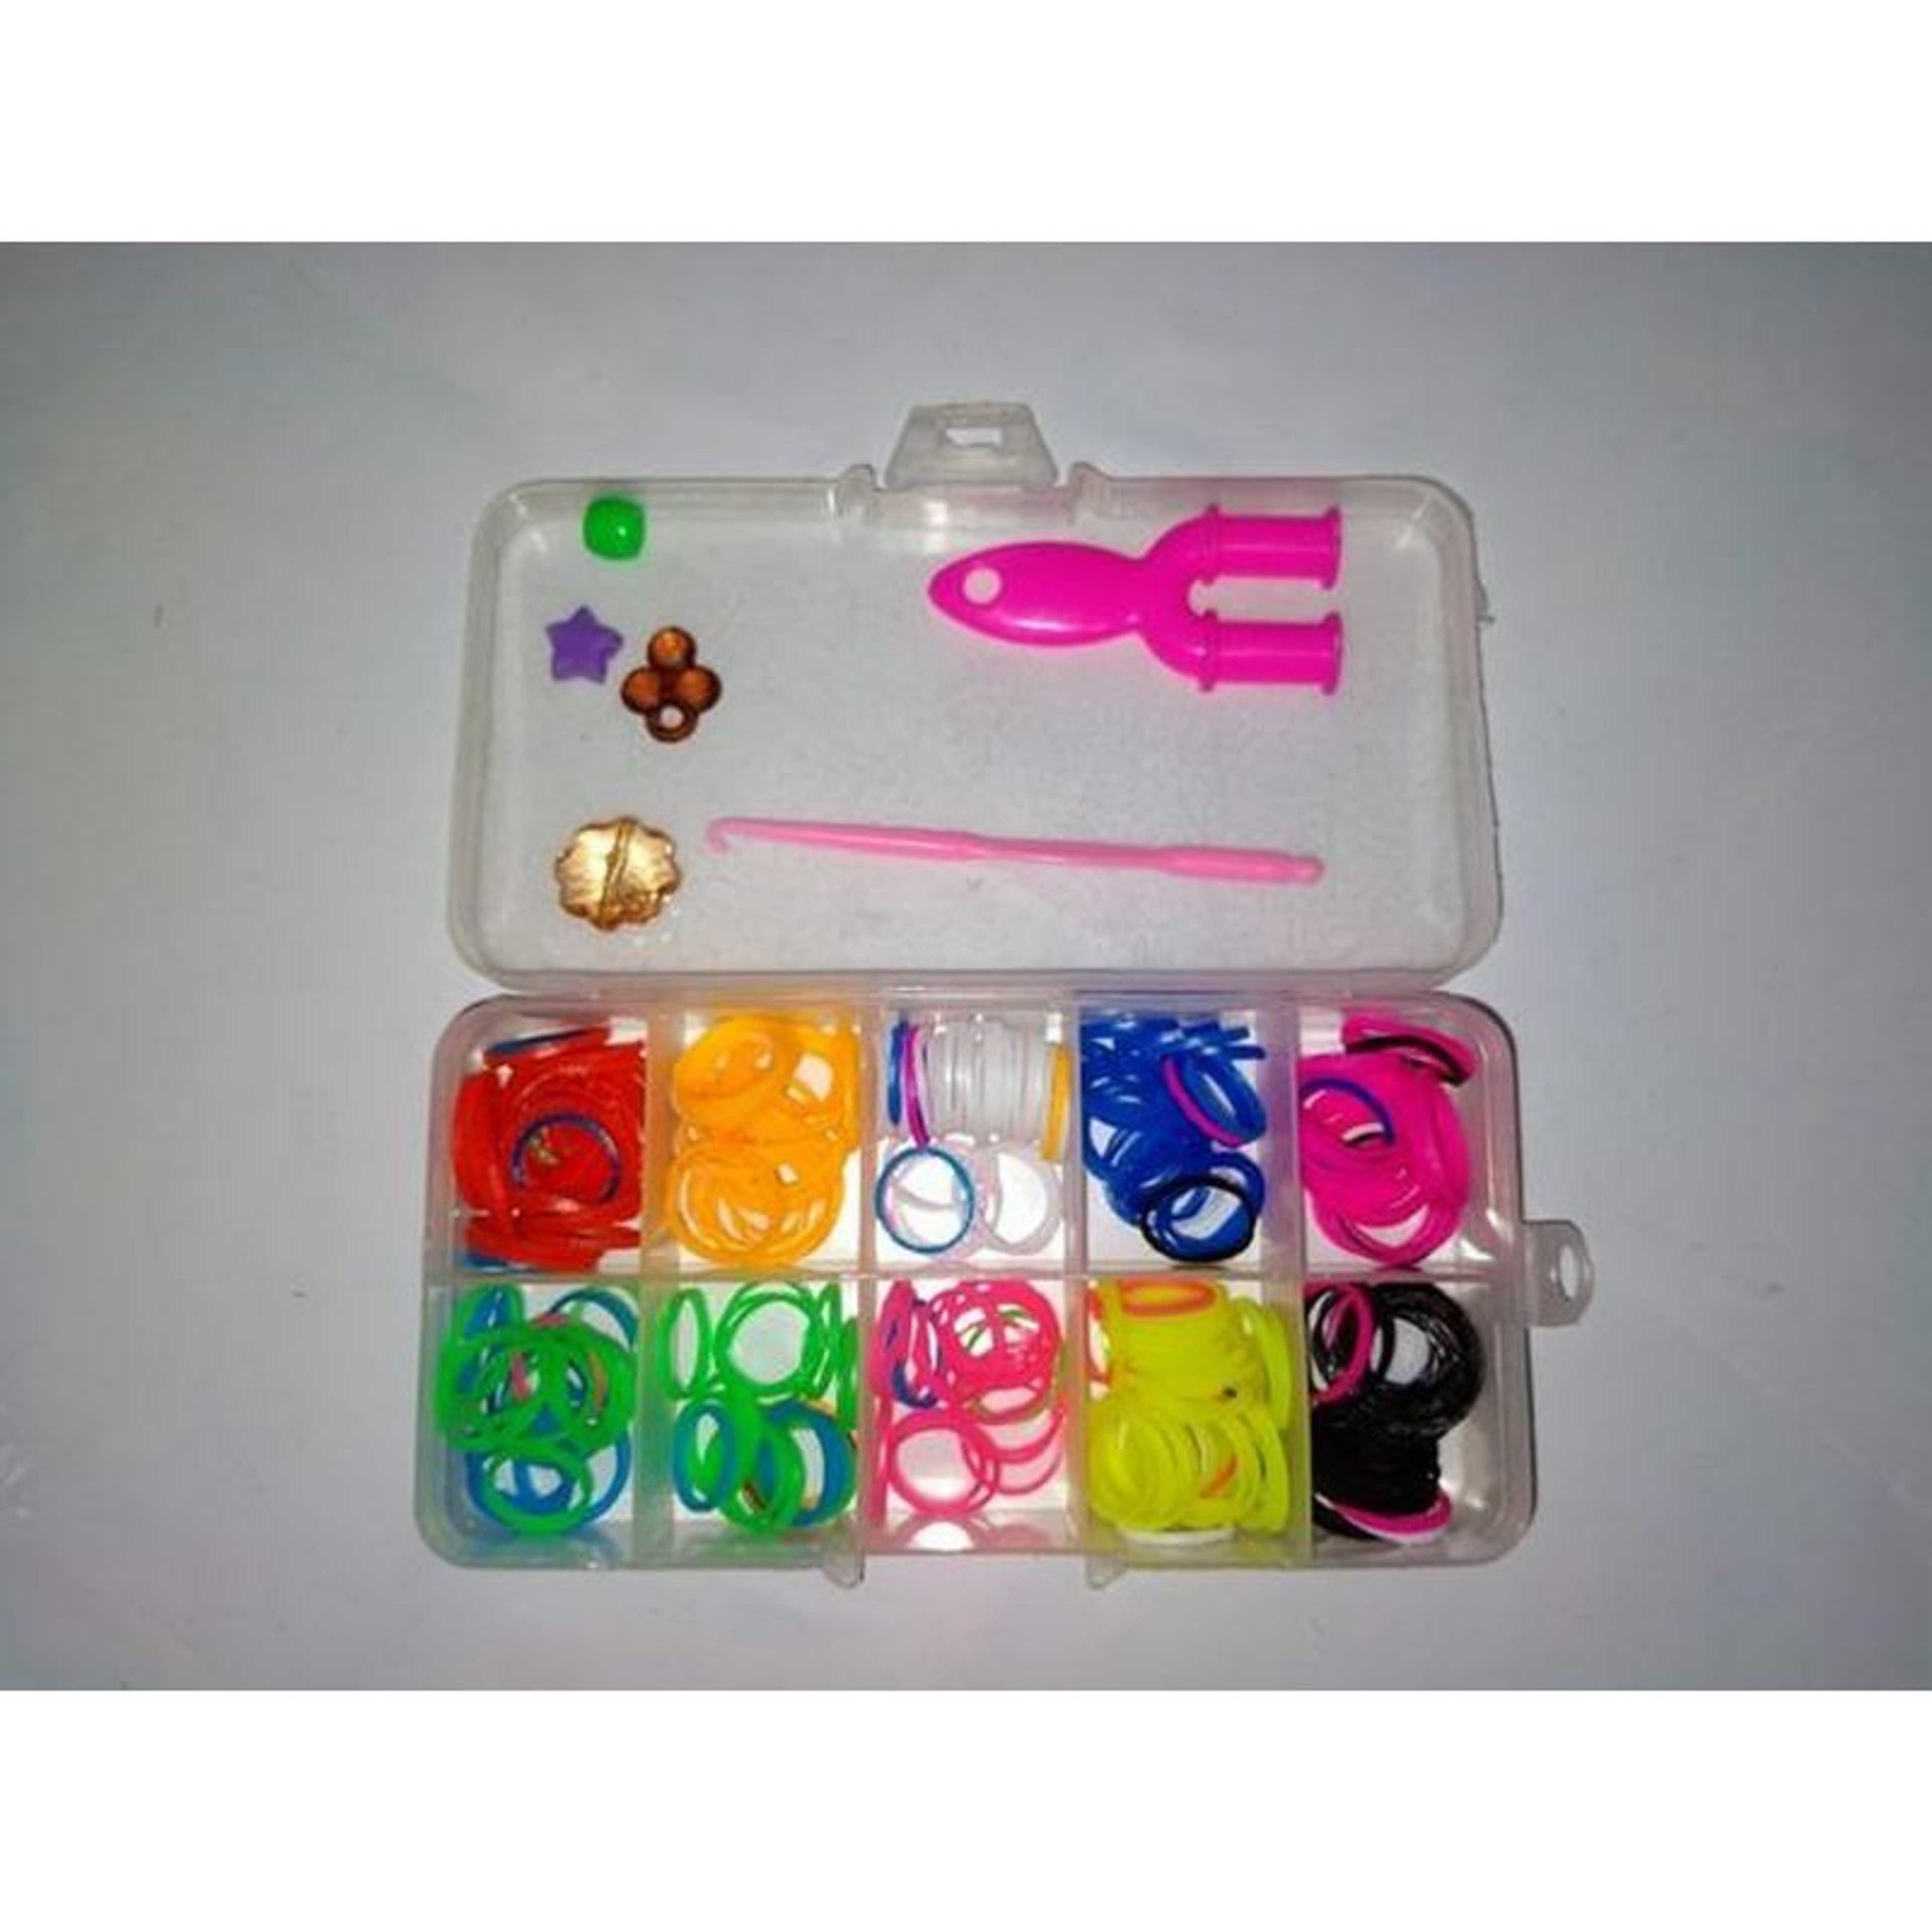 Top Selling Children's Toys DIY Colorful Rubber Loom Bands Refill Kit with Accessories, Mixed Color